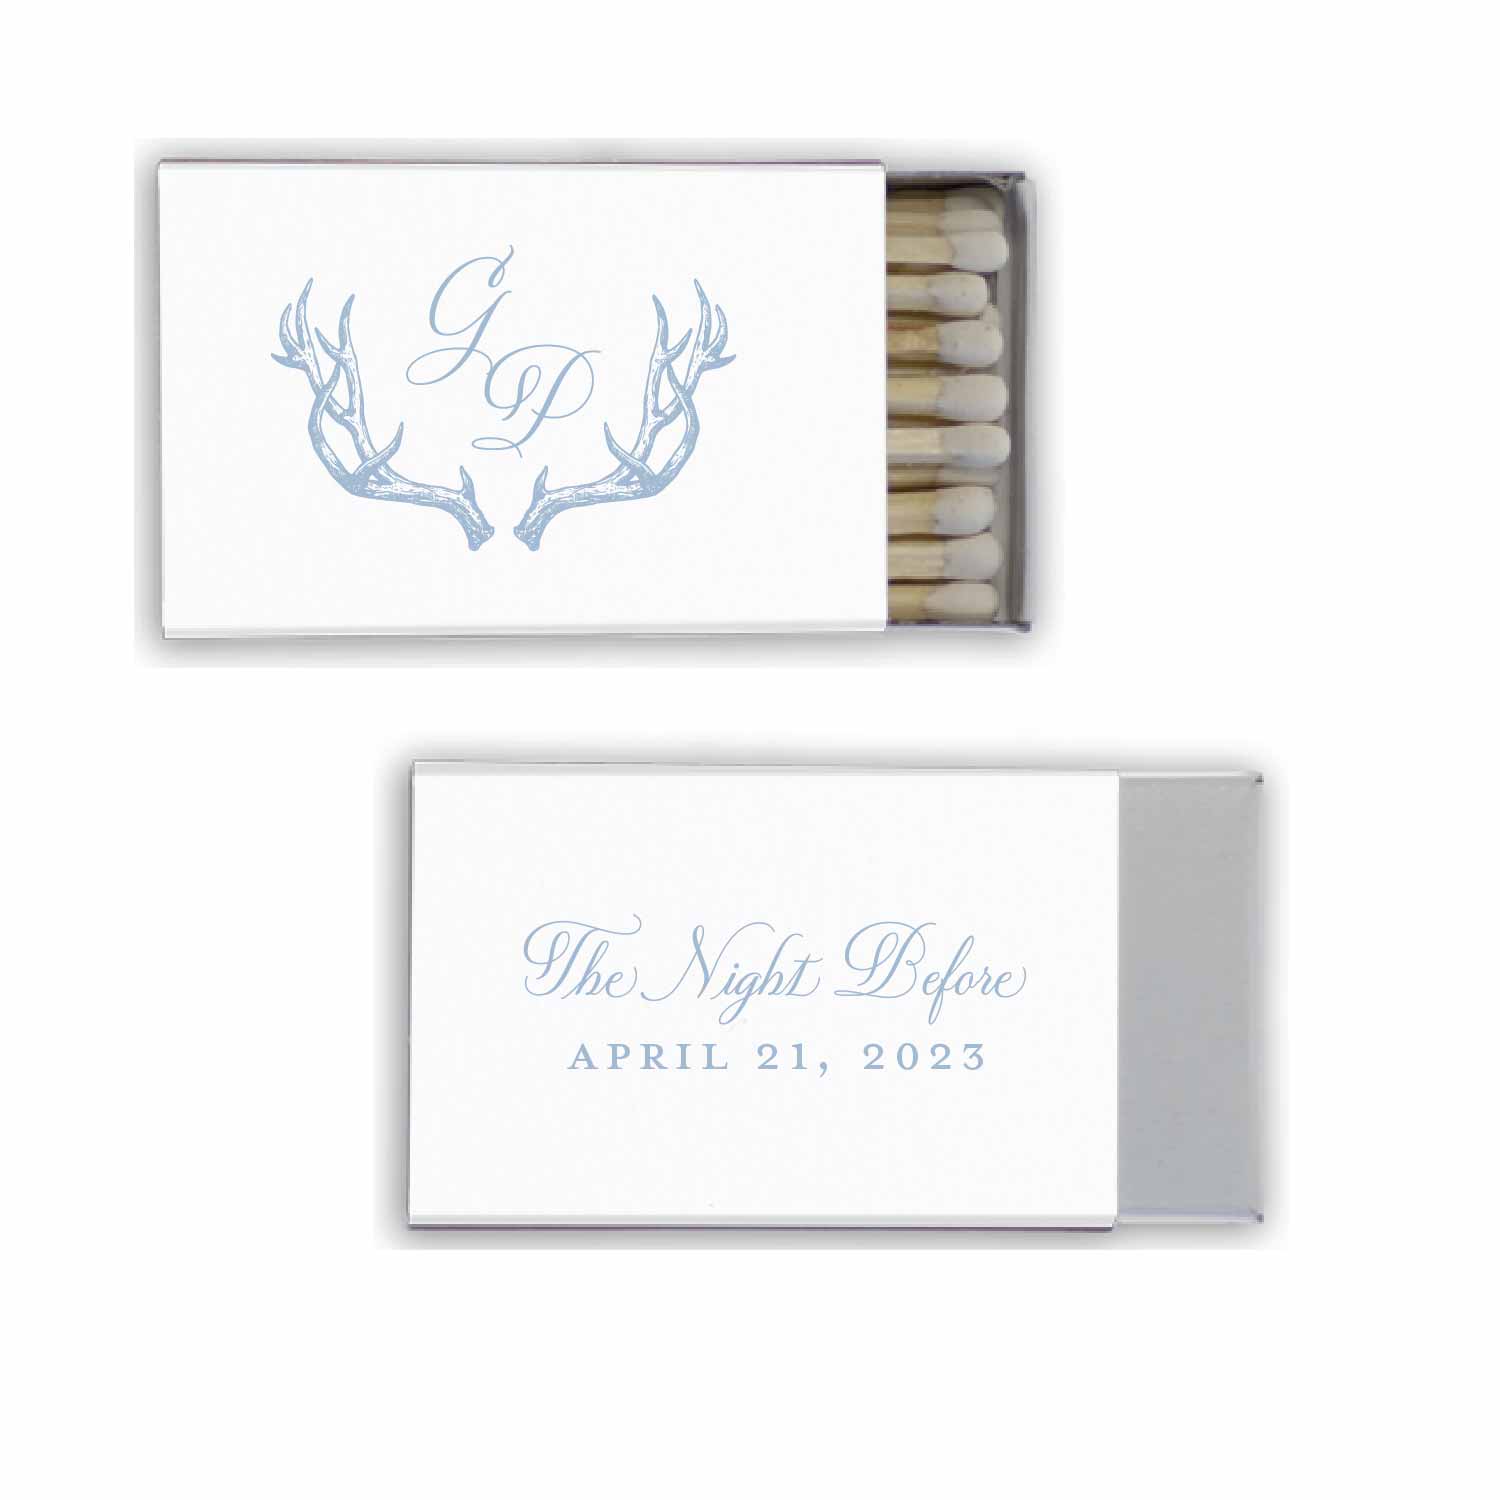 antlers Personalized Match Boxes